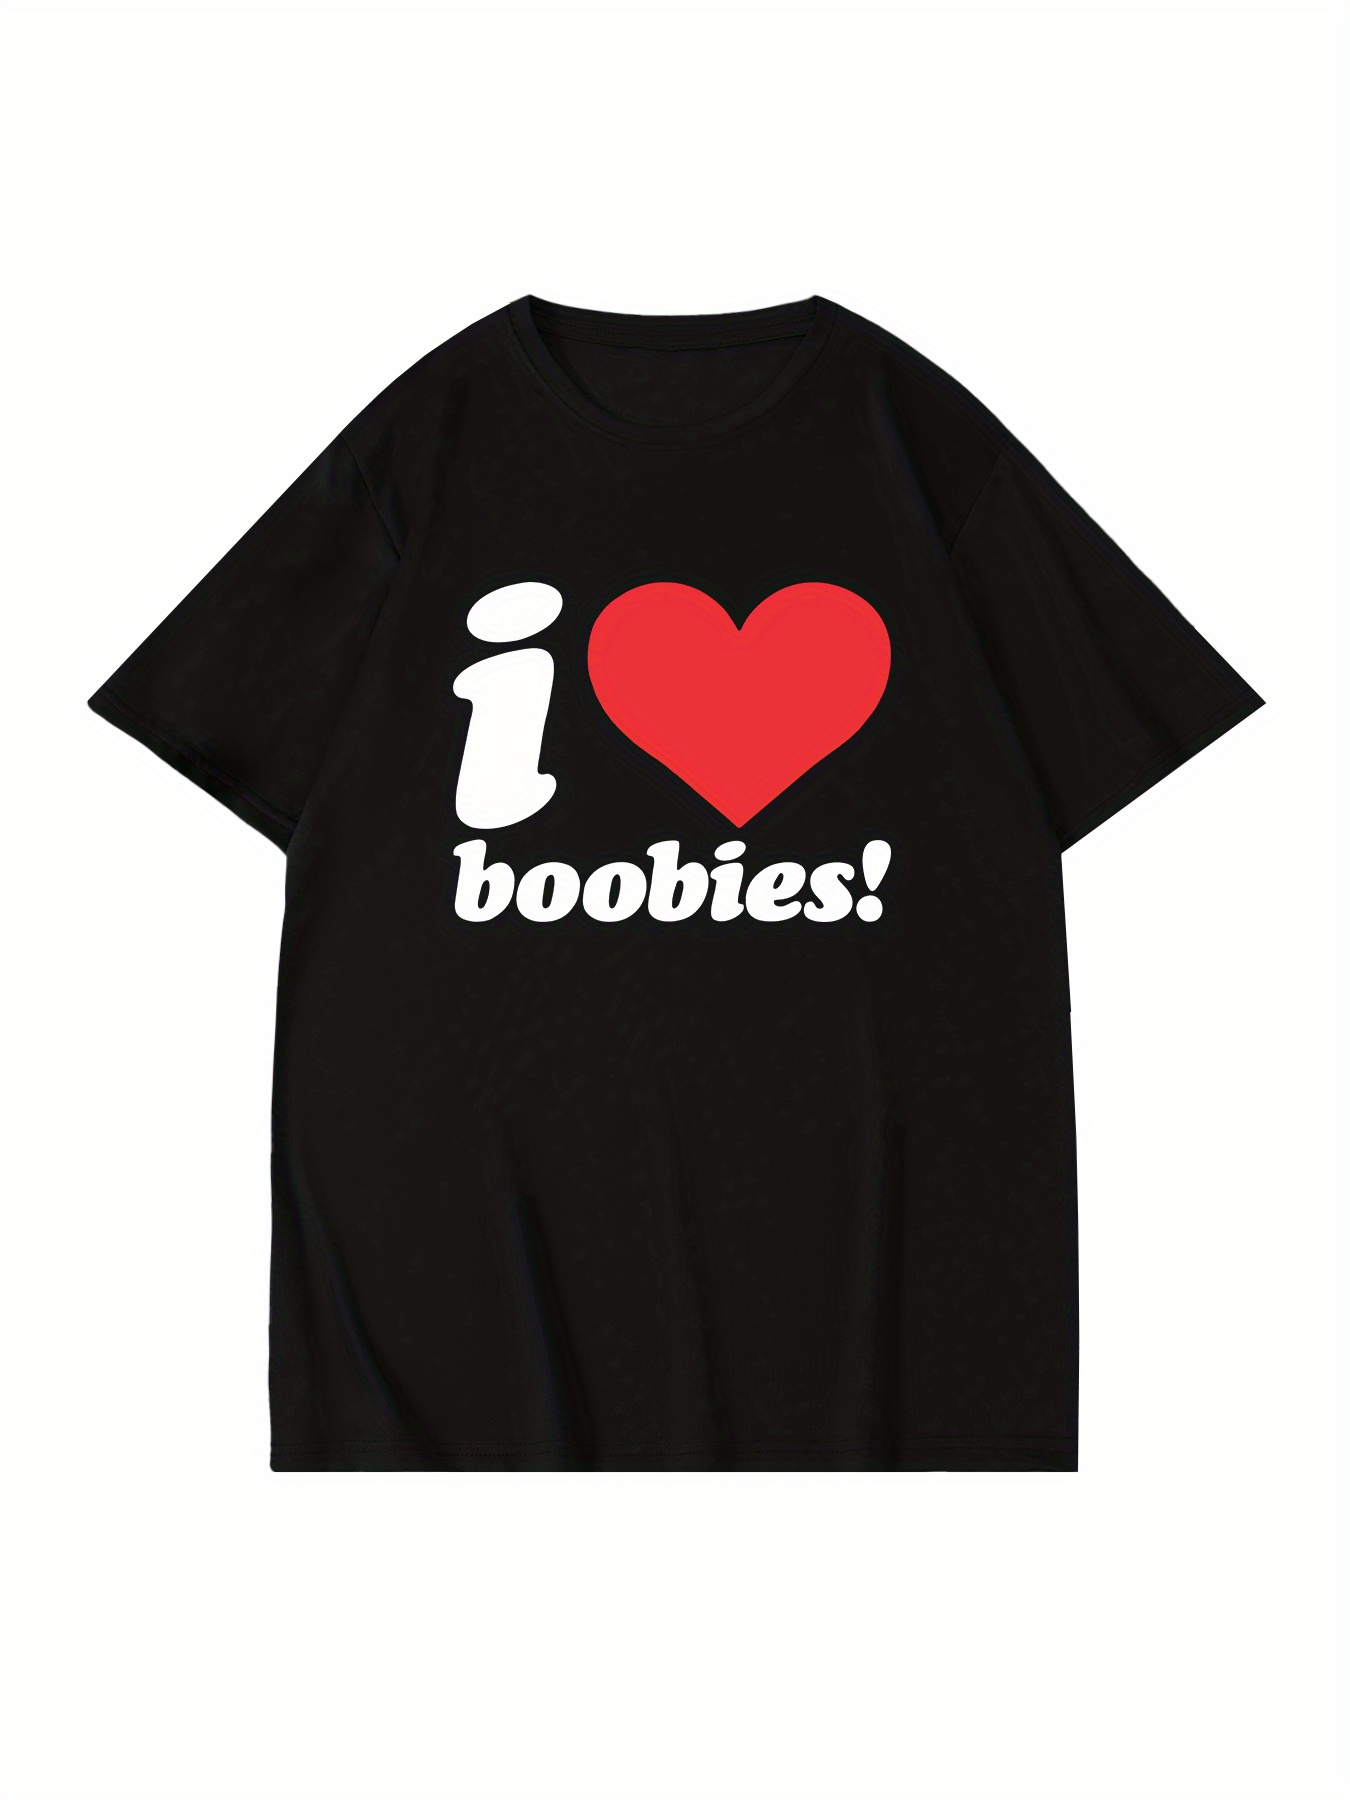  Womens Milky Mommy - Big Boobs Breast Milk Funny Titties For  Woman V-Neck T-Shirt : Clothing, Shoes & Jewelry